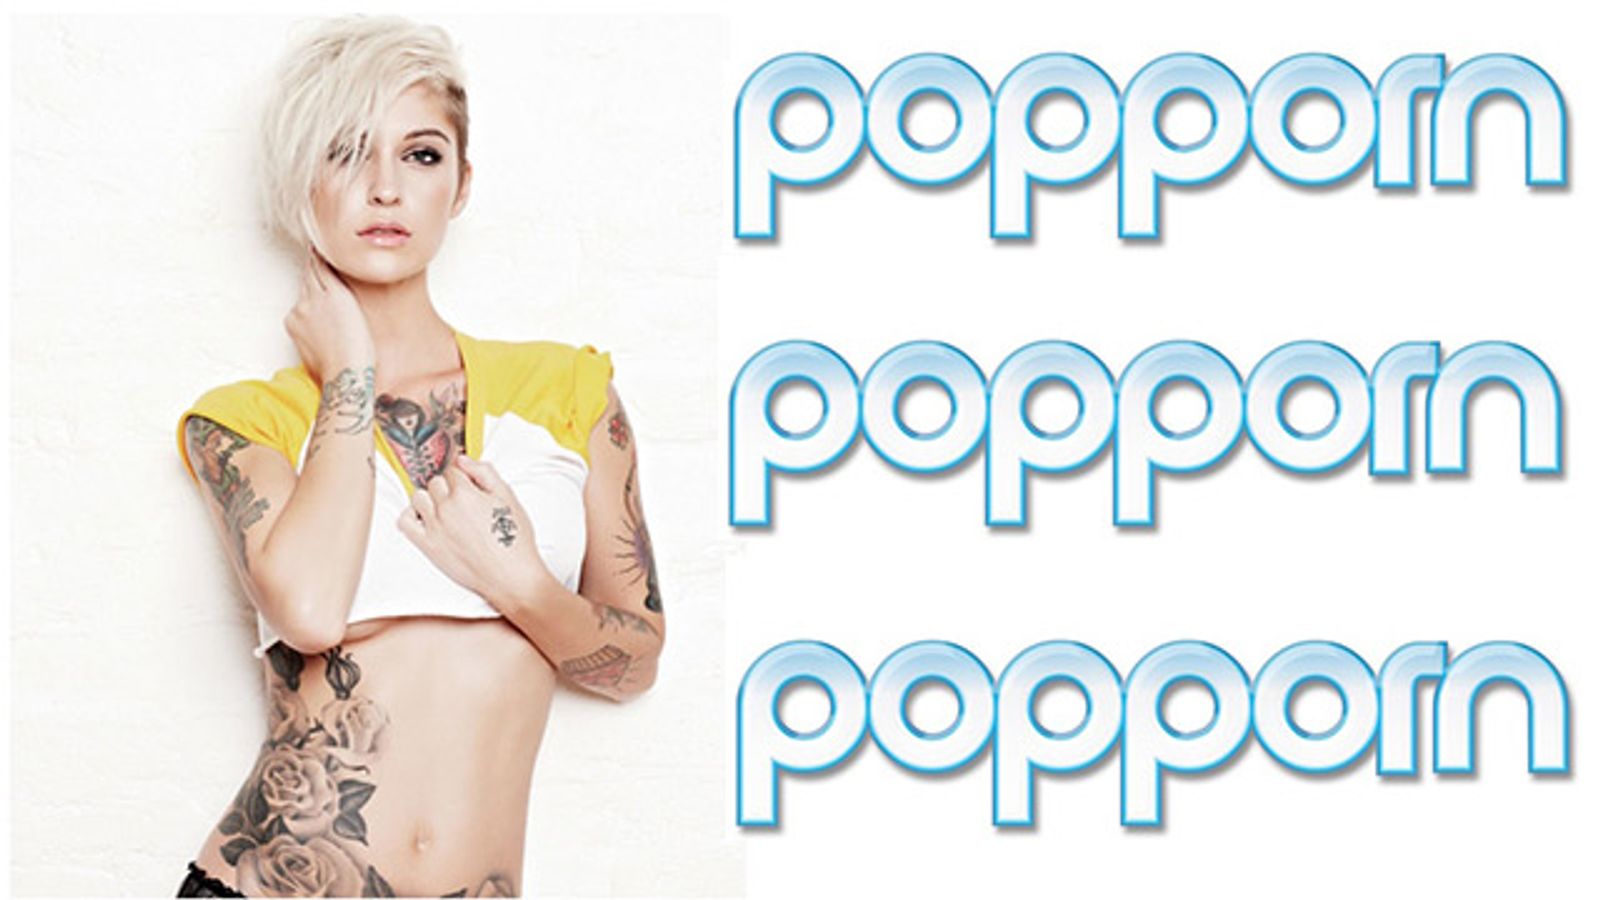 Kleio Valentien Is Now a Contributing Writer at Popporn.com